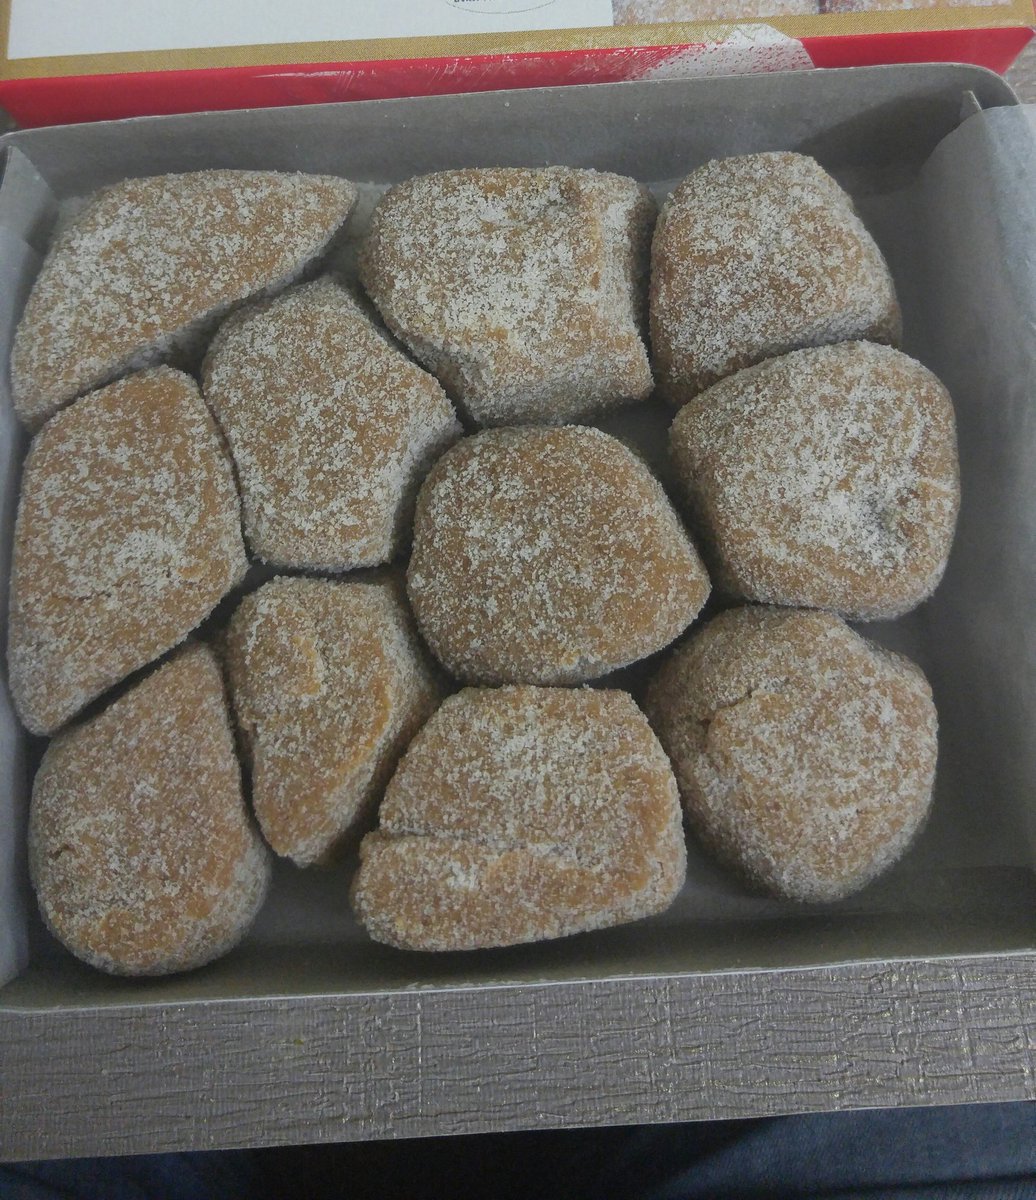 Pedha originated in UP & Babusingh Thakur brought this sweet to Dharwad. His family migrated from Unnao in UP to Dharwad after plague a broke out in early 19th Century.To this day, people queue up early in the morning outside the Line Bazaar outlet in Dharwad to buy pedhas.